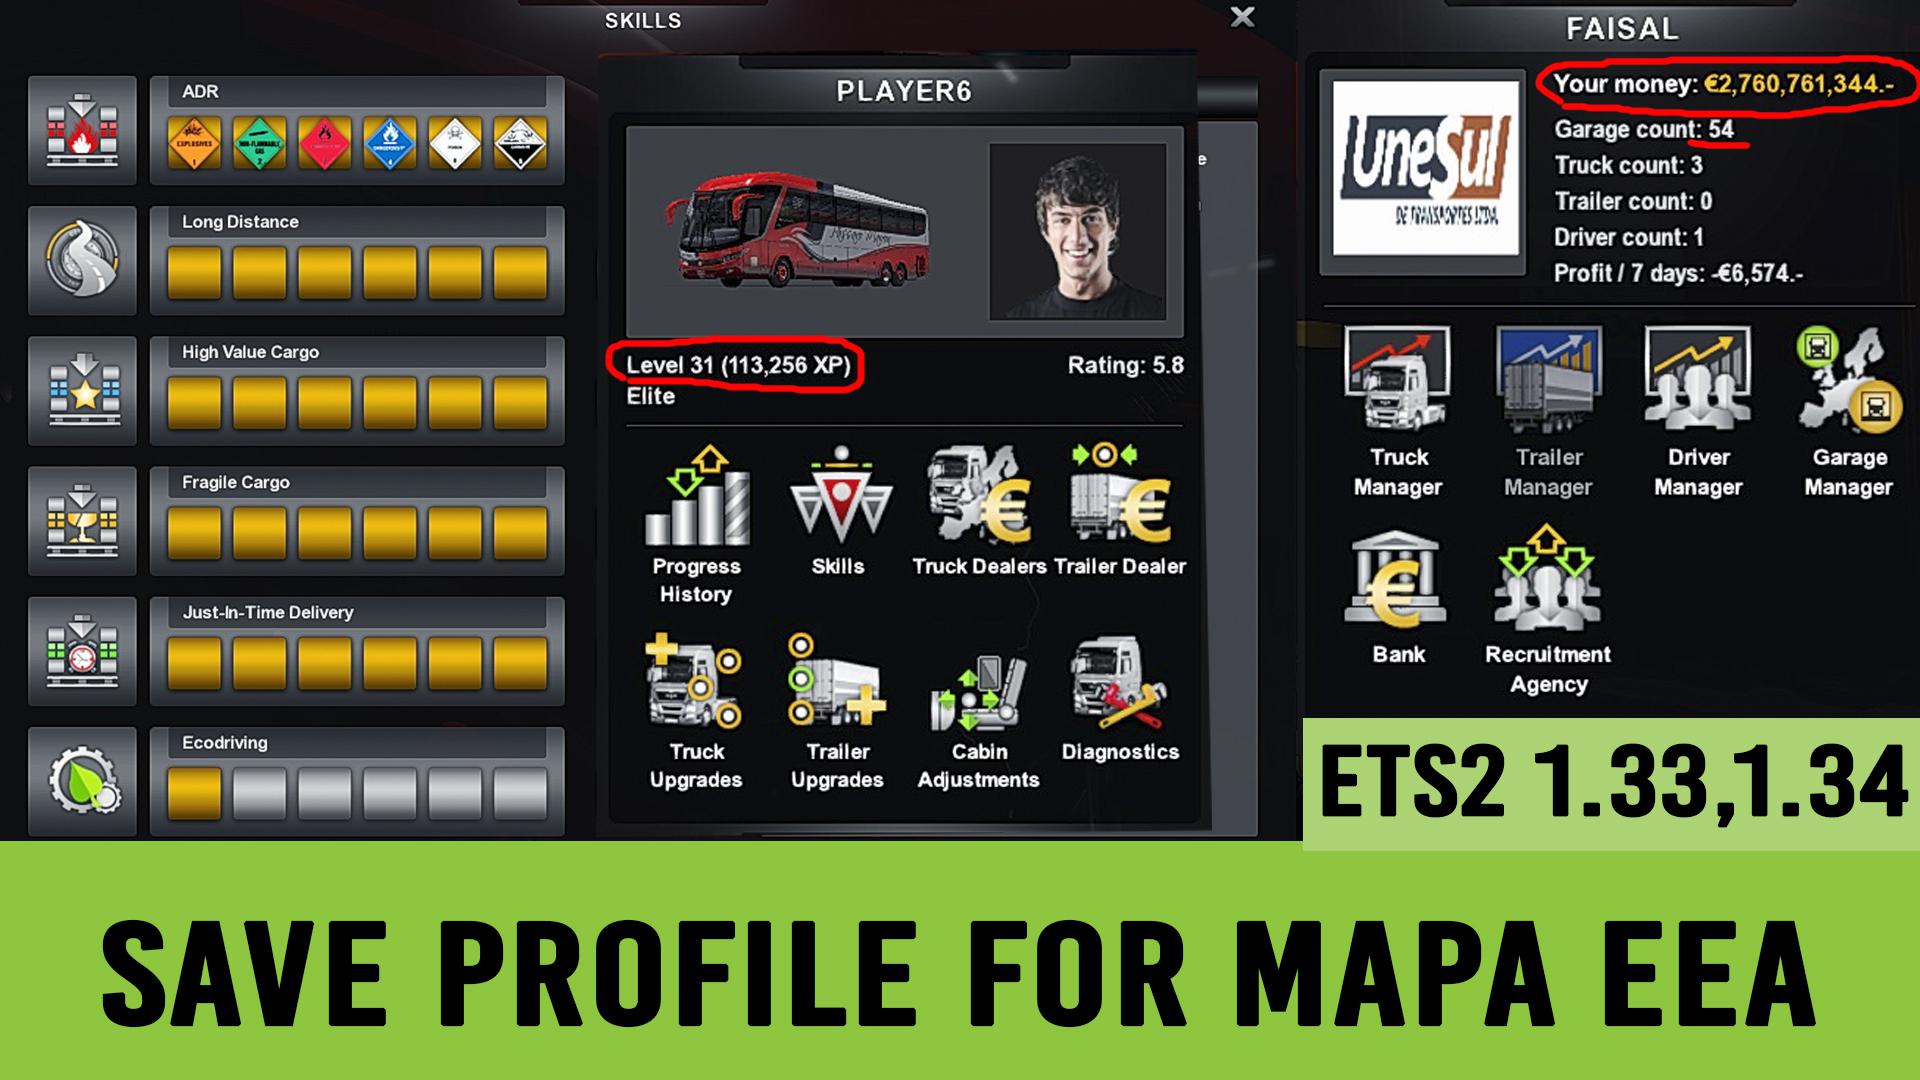 Save Game (Profile) for Mapa EAA Truck and Bus 10 Anos 1.34